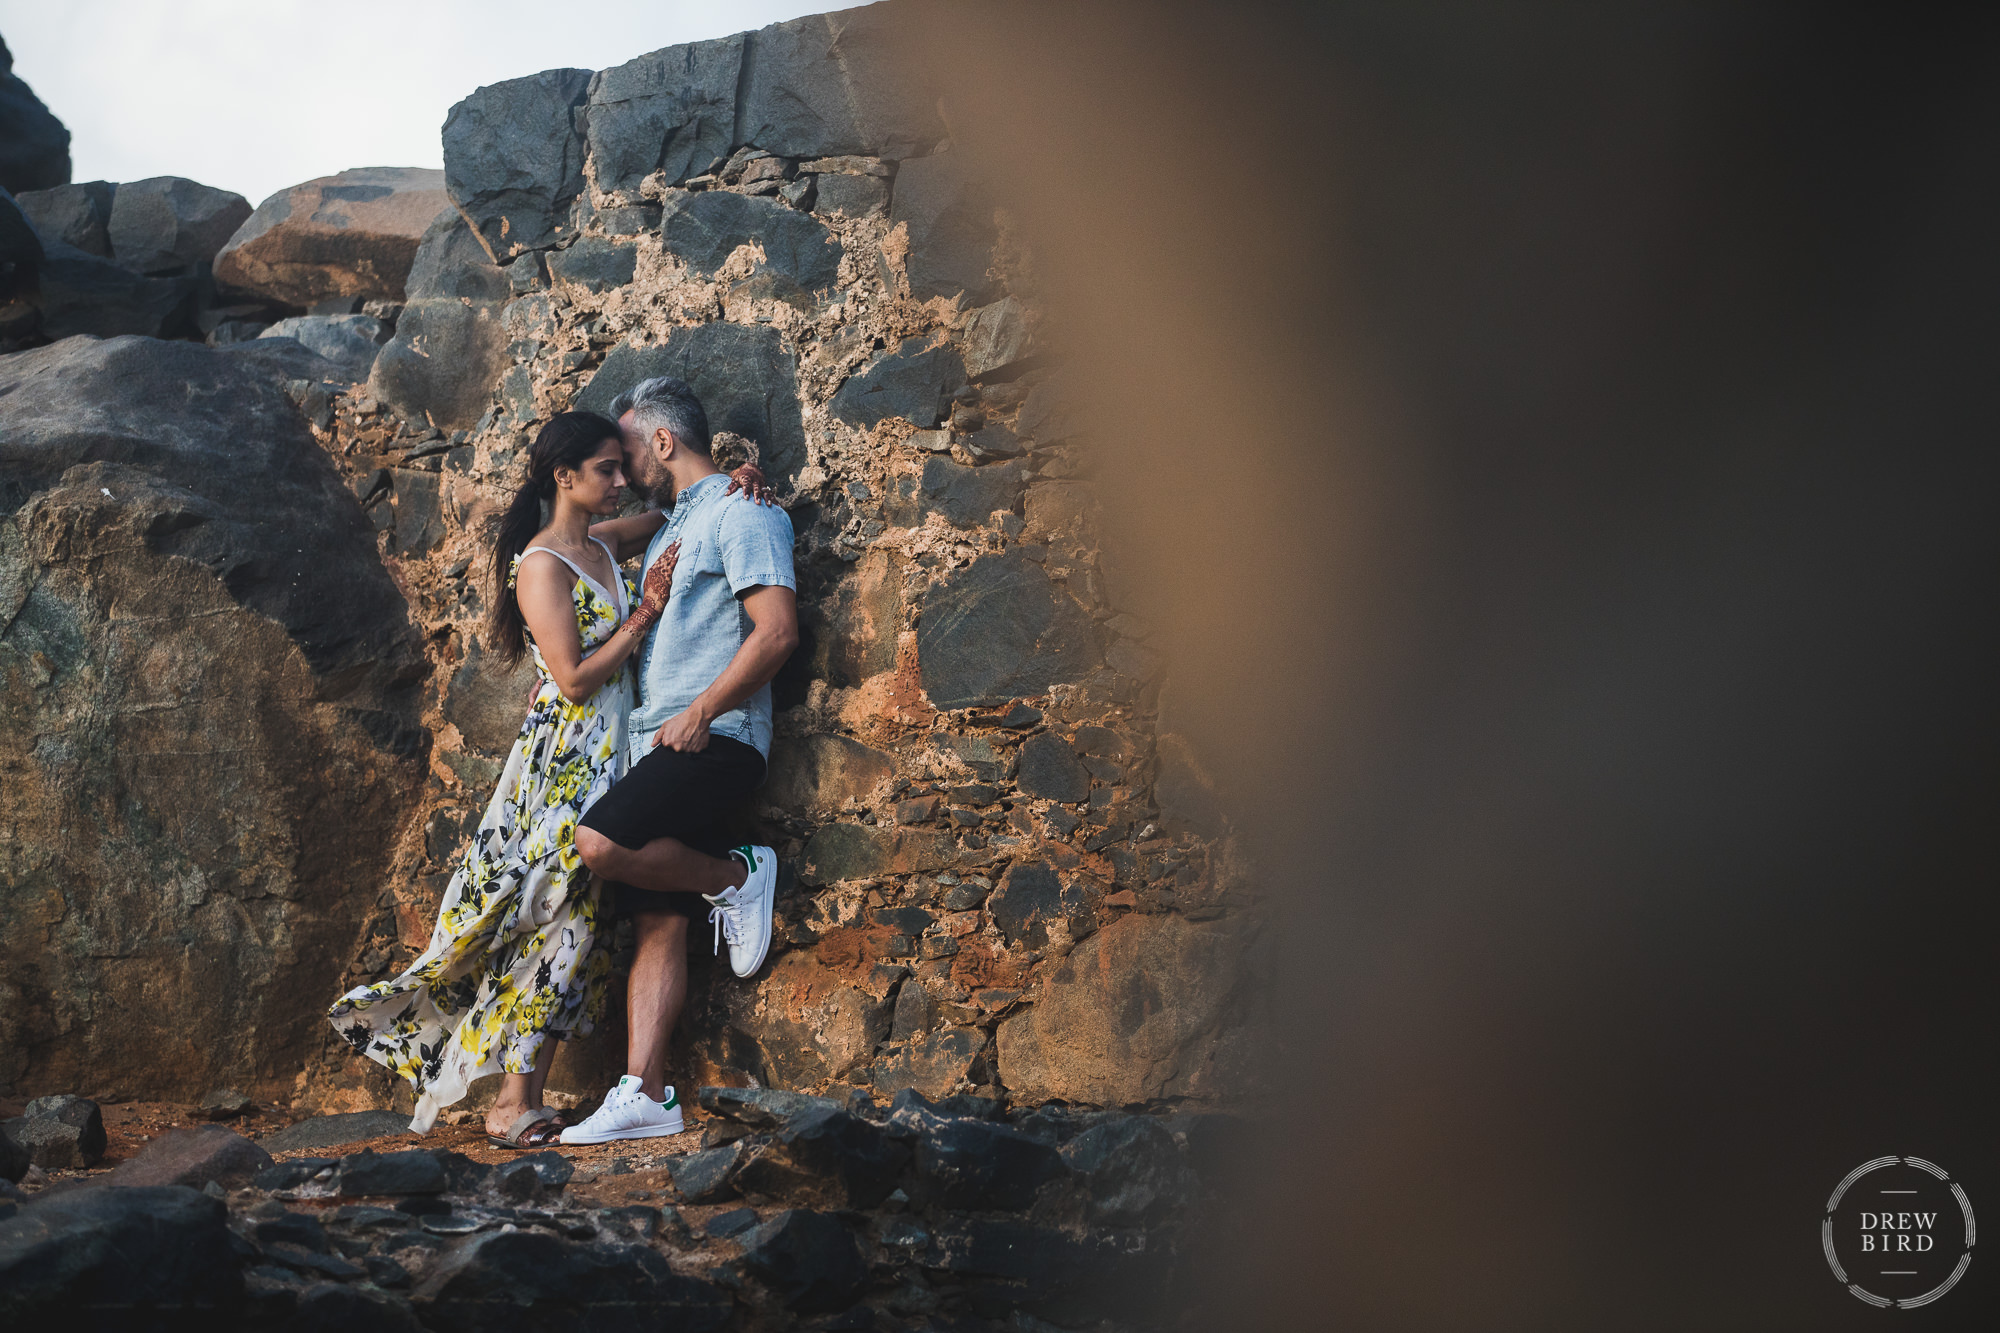 Hindu wedding couple lean against the walls of an ancient ruin in an intimate embrace. Destination wedding photography on Aruba.